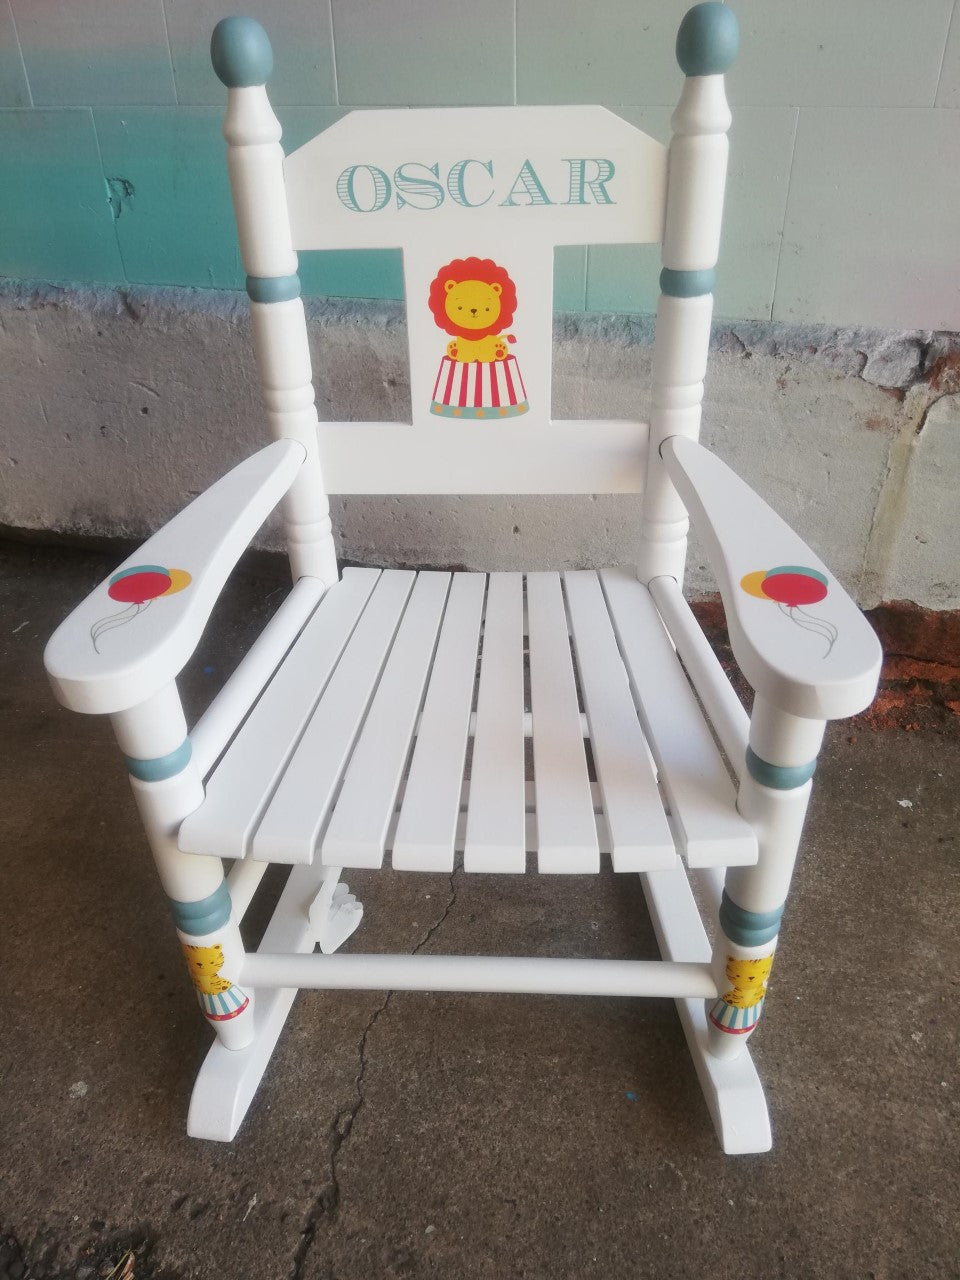 Personalised children's rocking chair with cute circus theme made to order